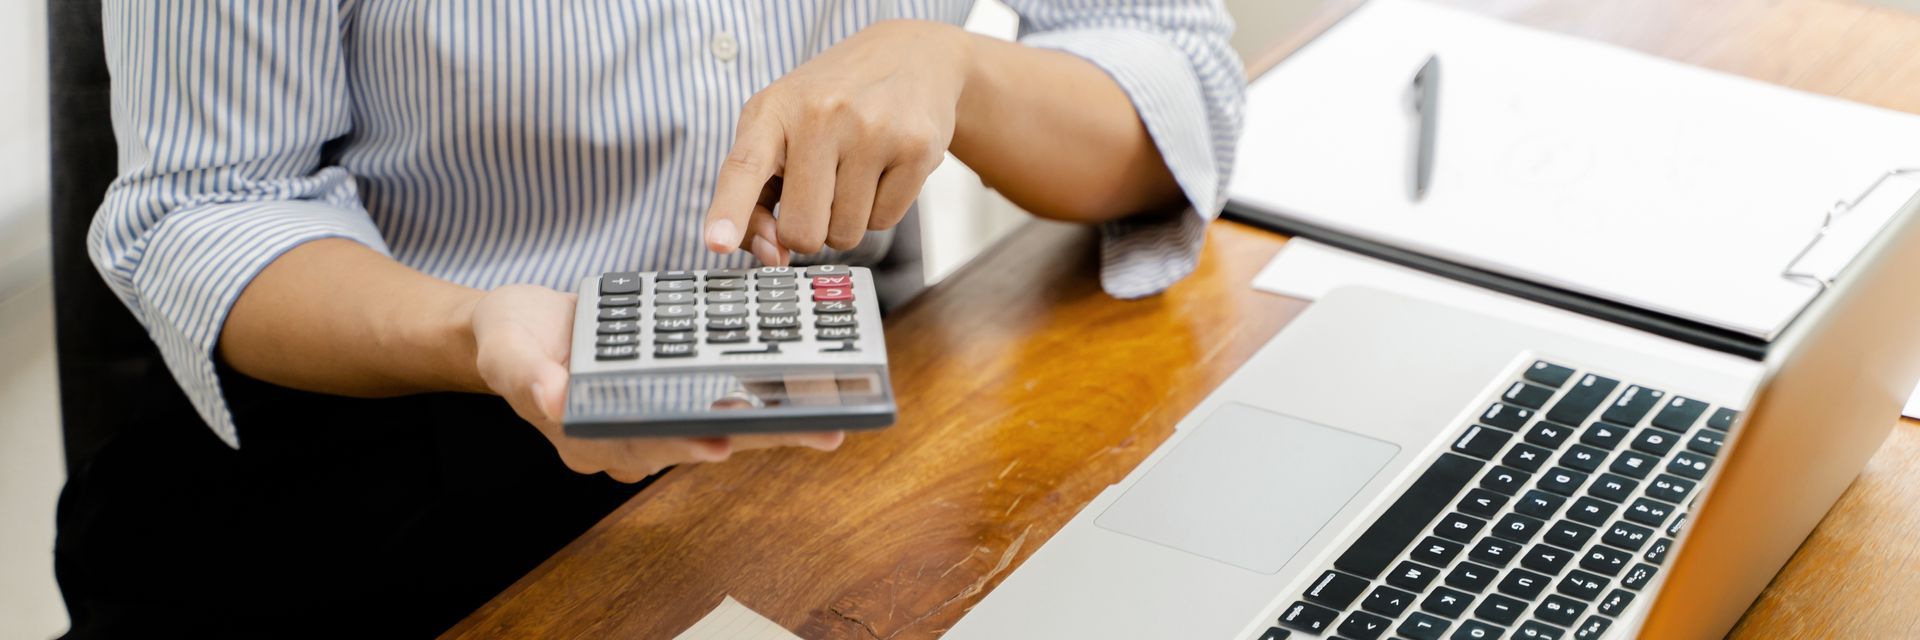 Woman using calculator - Pine Bush, NY - JPM Bookkeeping Services